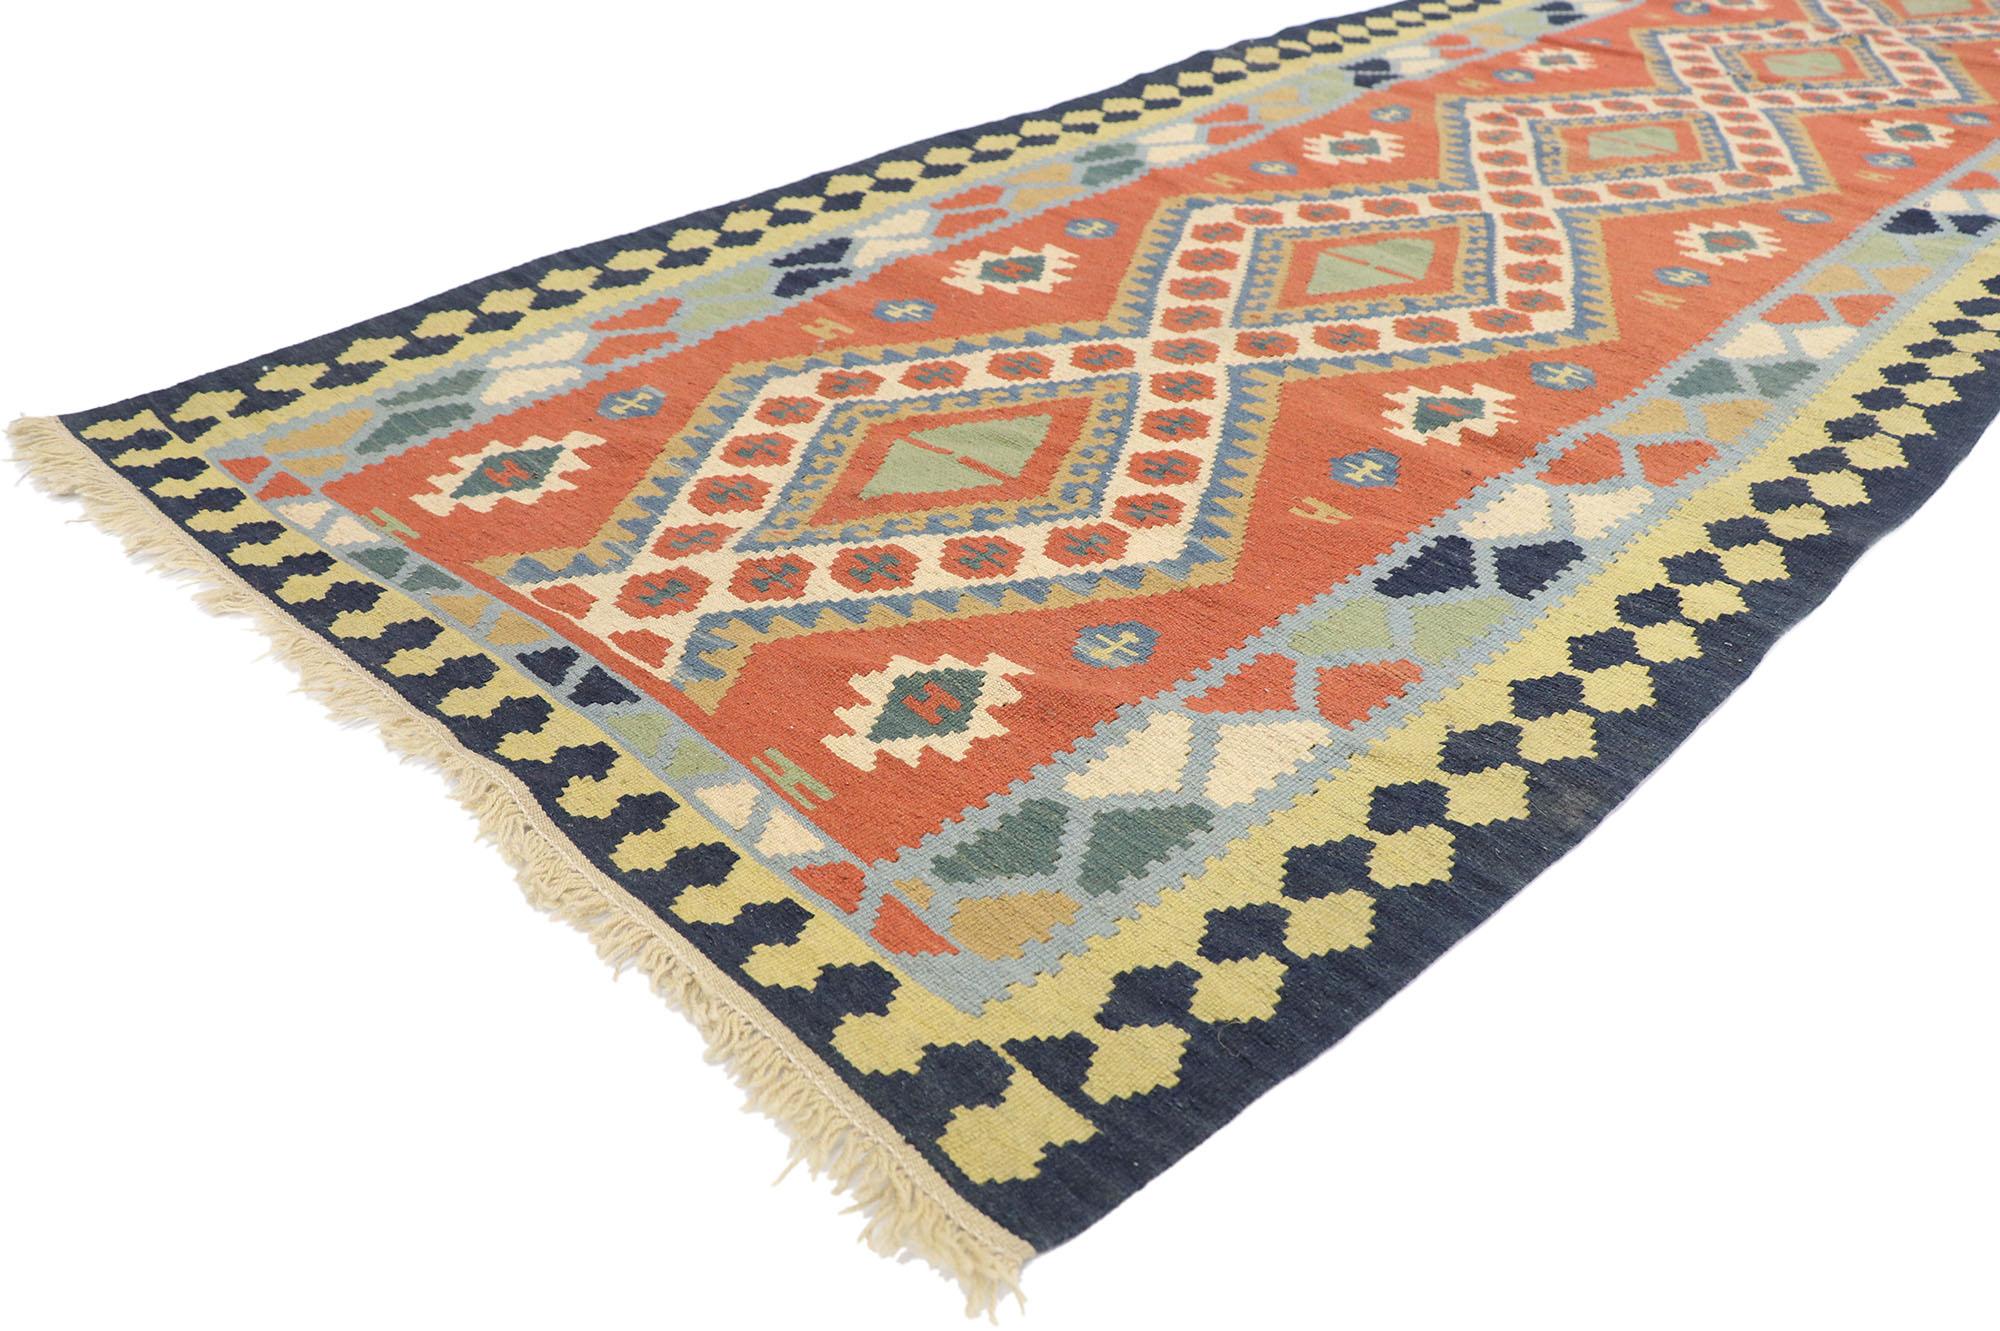 77925, vintage Persian Shiraz Kilim Runner with Tribal style. Full of tiny details and a bold expressive design combined with vibrant colors and tribal style, this hand-woven wool vintage Persian Shiraz kilim runner is a captivating vision of woven